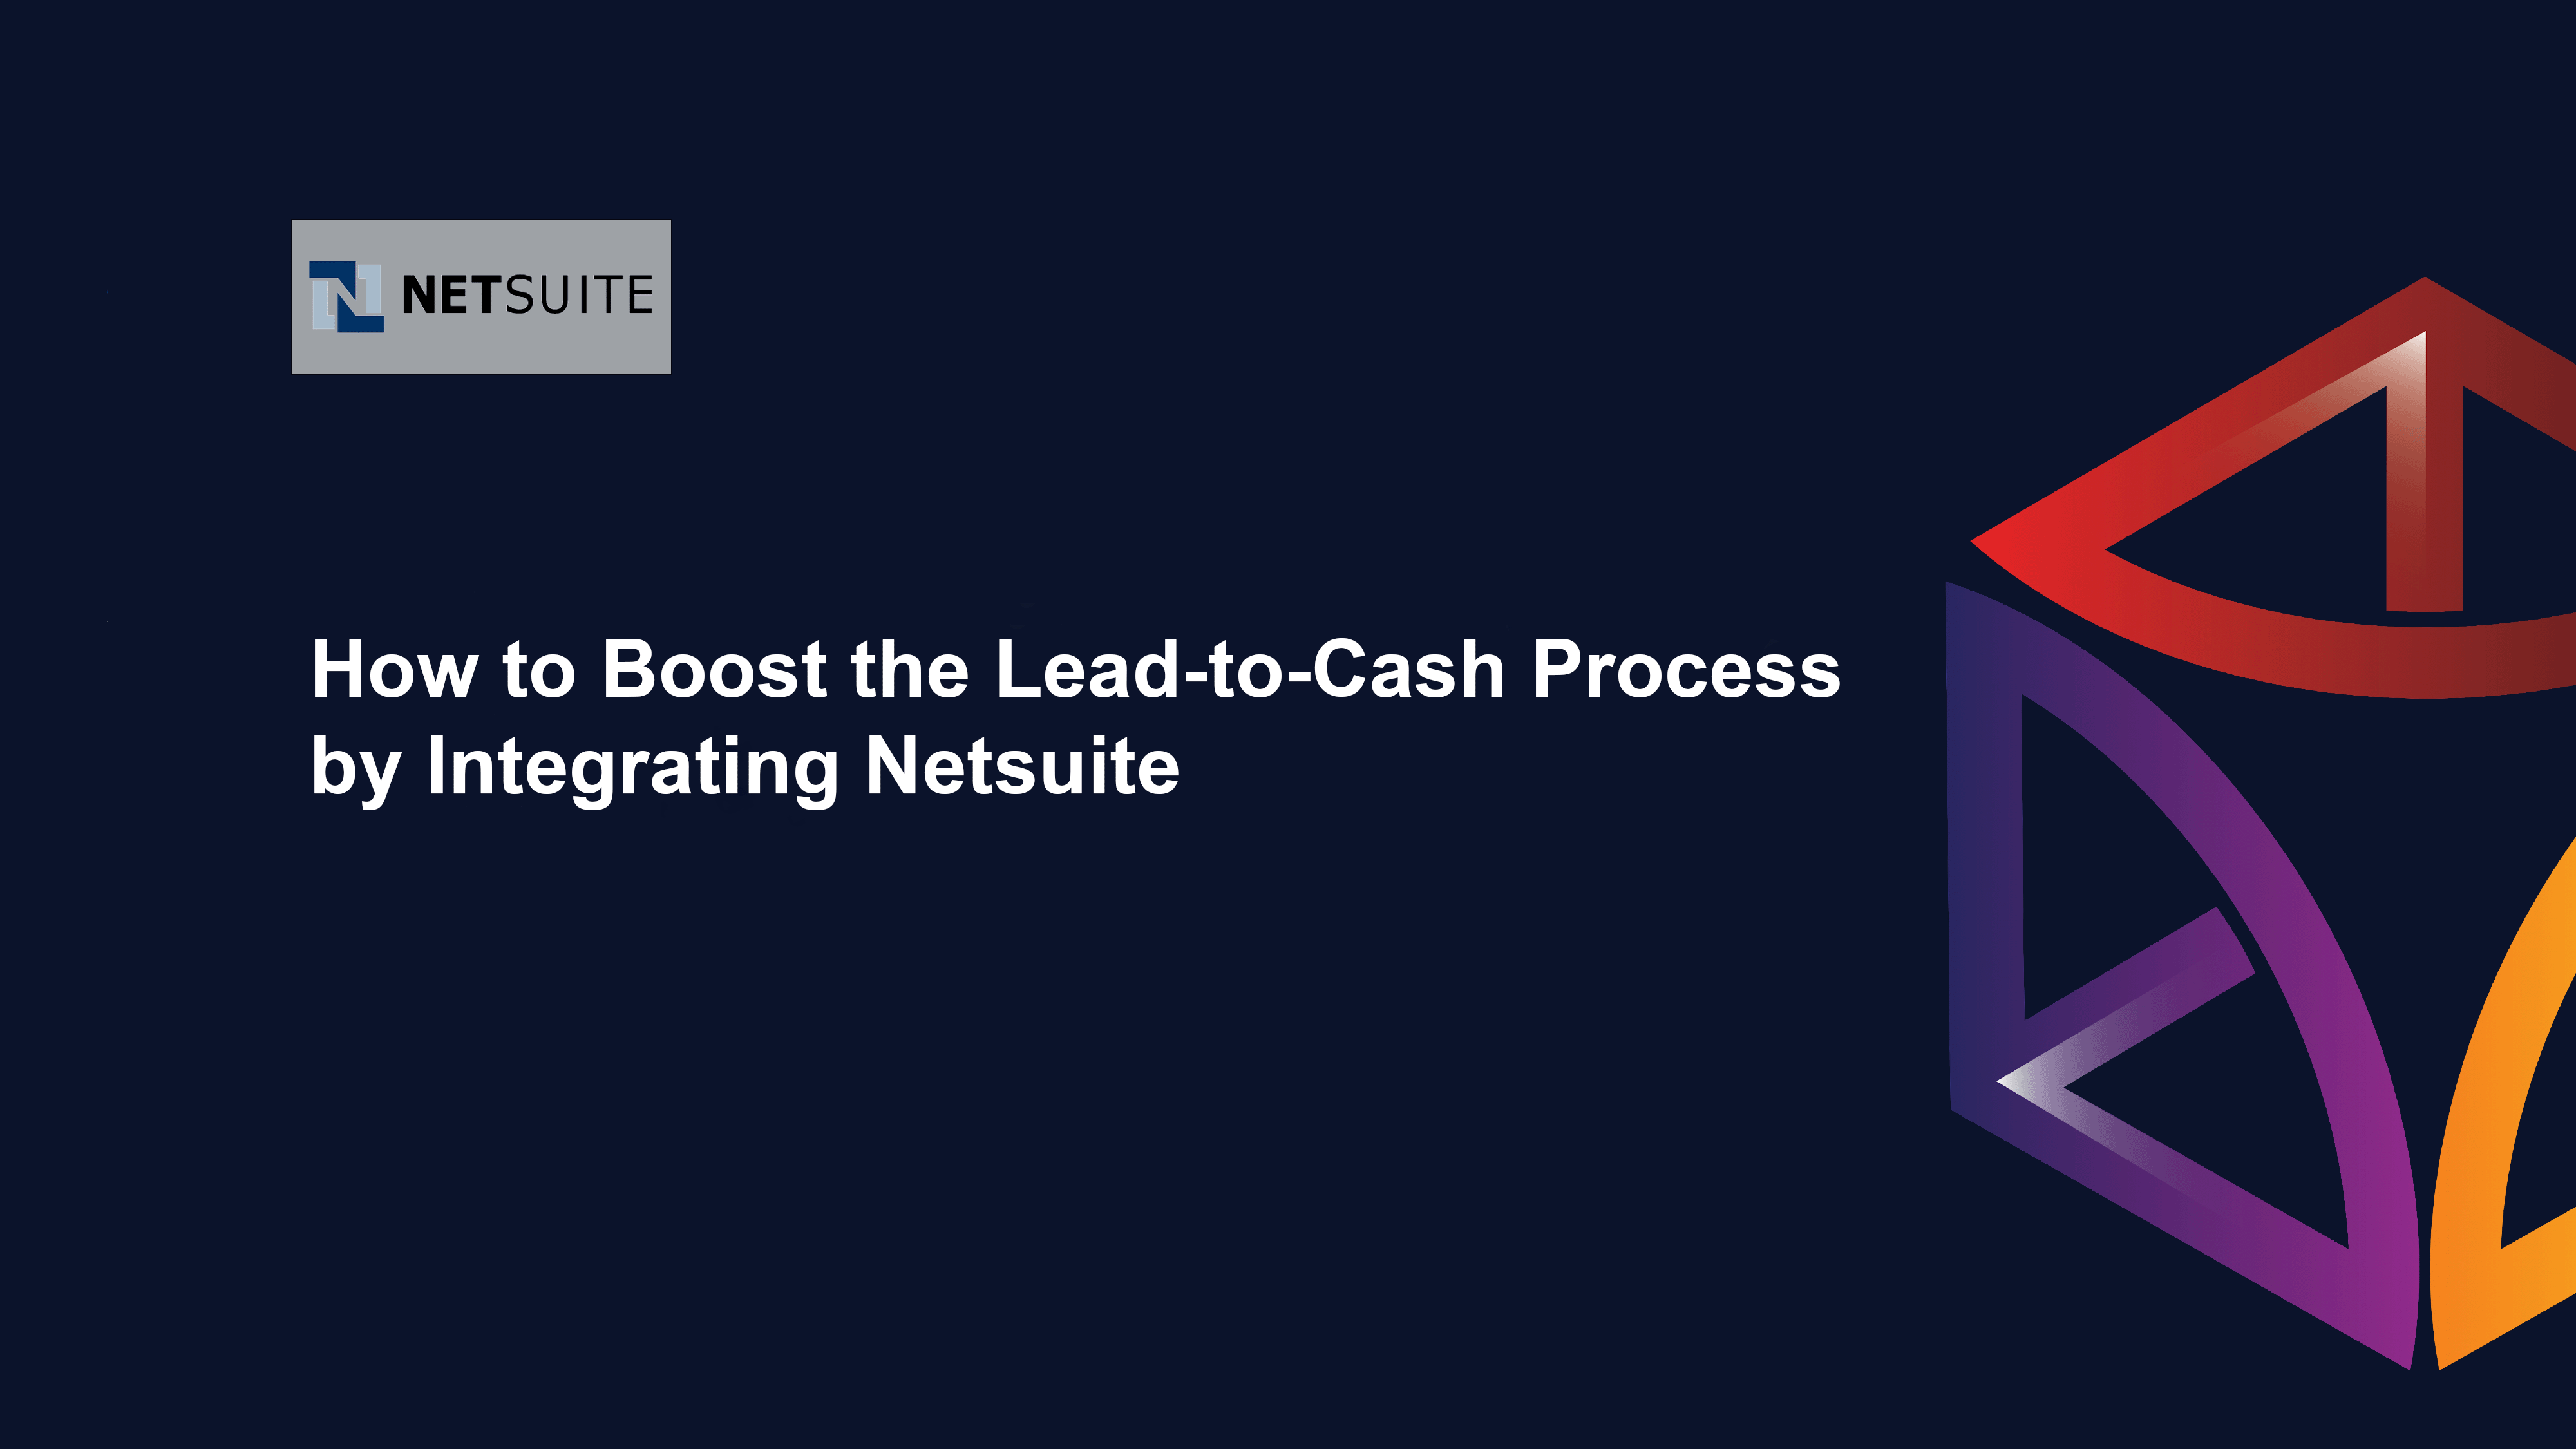 How to boost the lead-to-cash process by integrating Netsuite